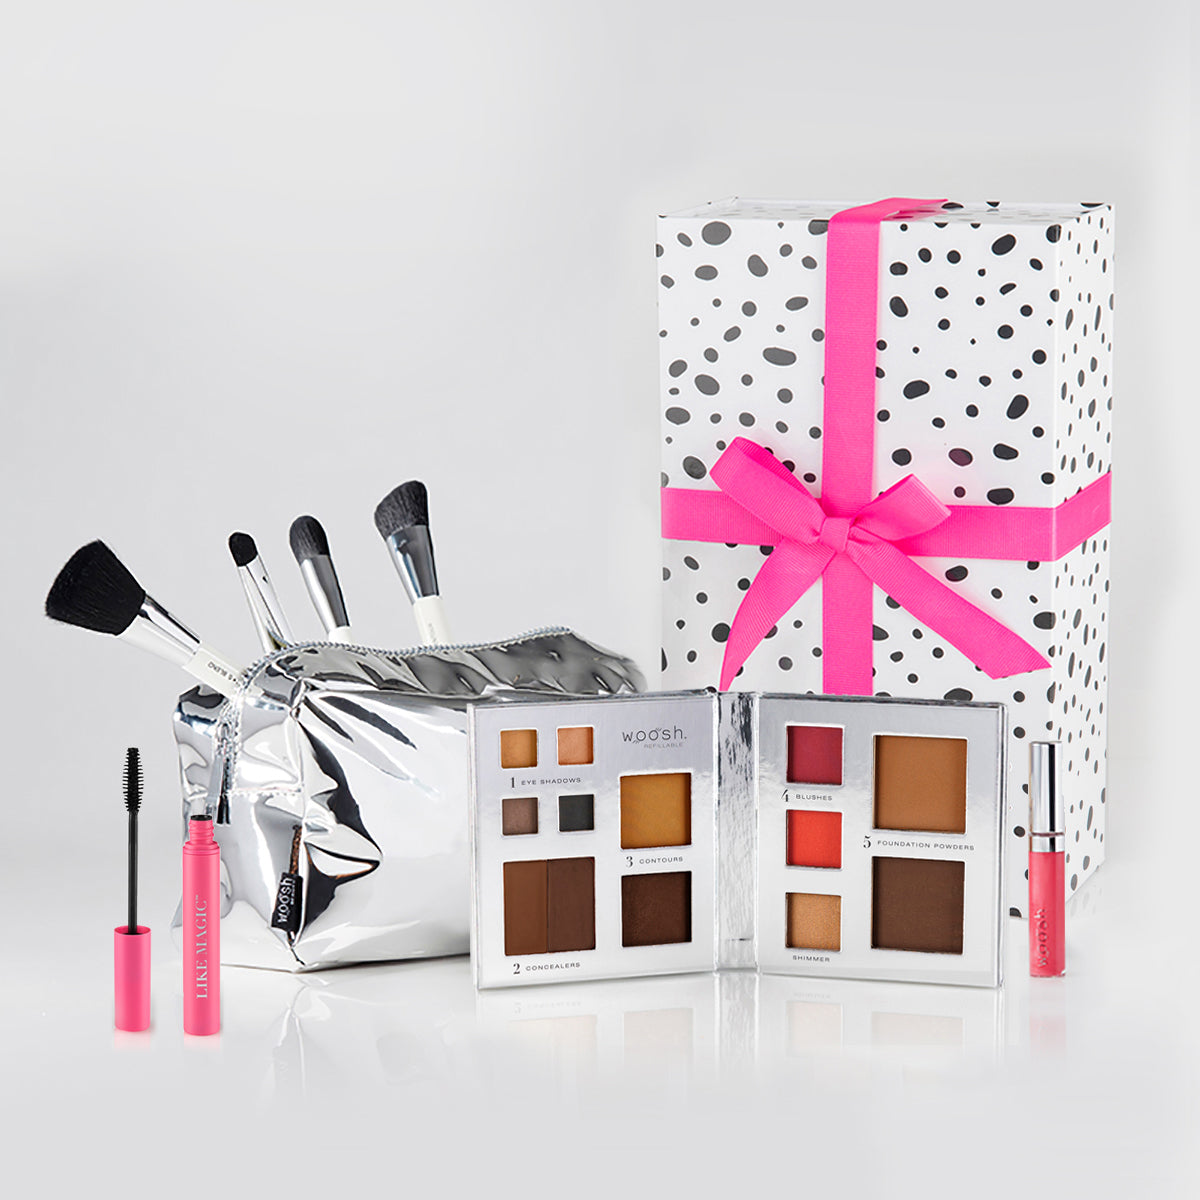 I want it all bundle image. Includes 13 pan Refillable Fold out Face Palette, Like magic tubing mascara, pink natural lip gloss, essential brush set, essential brush bag and polka dot gift box with pink ribbon. 